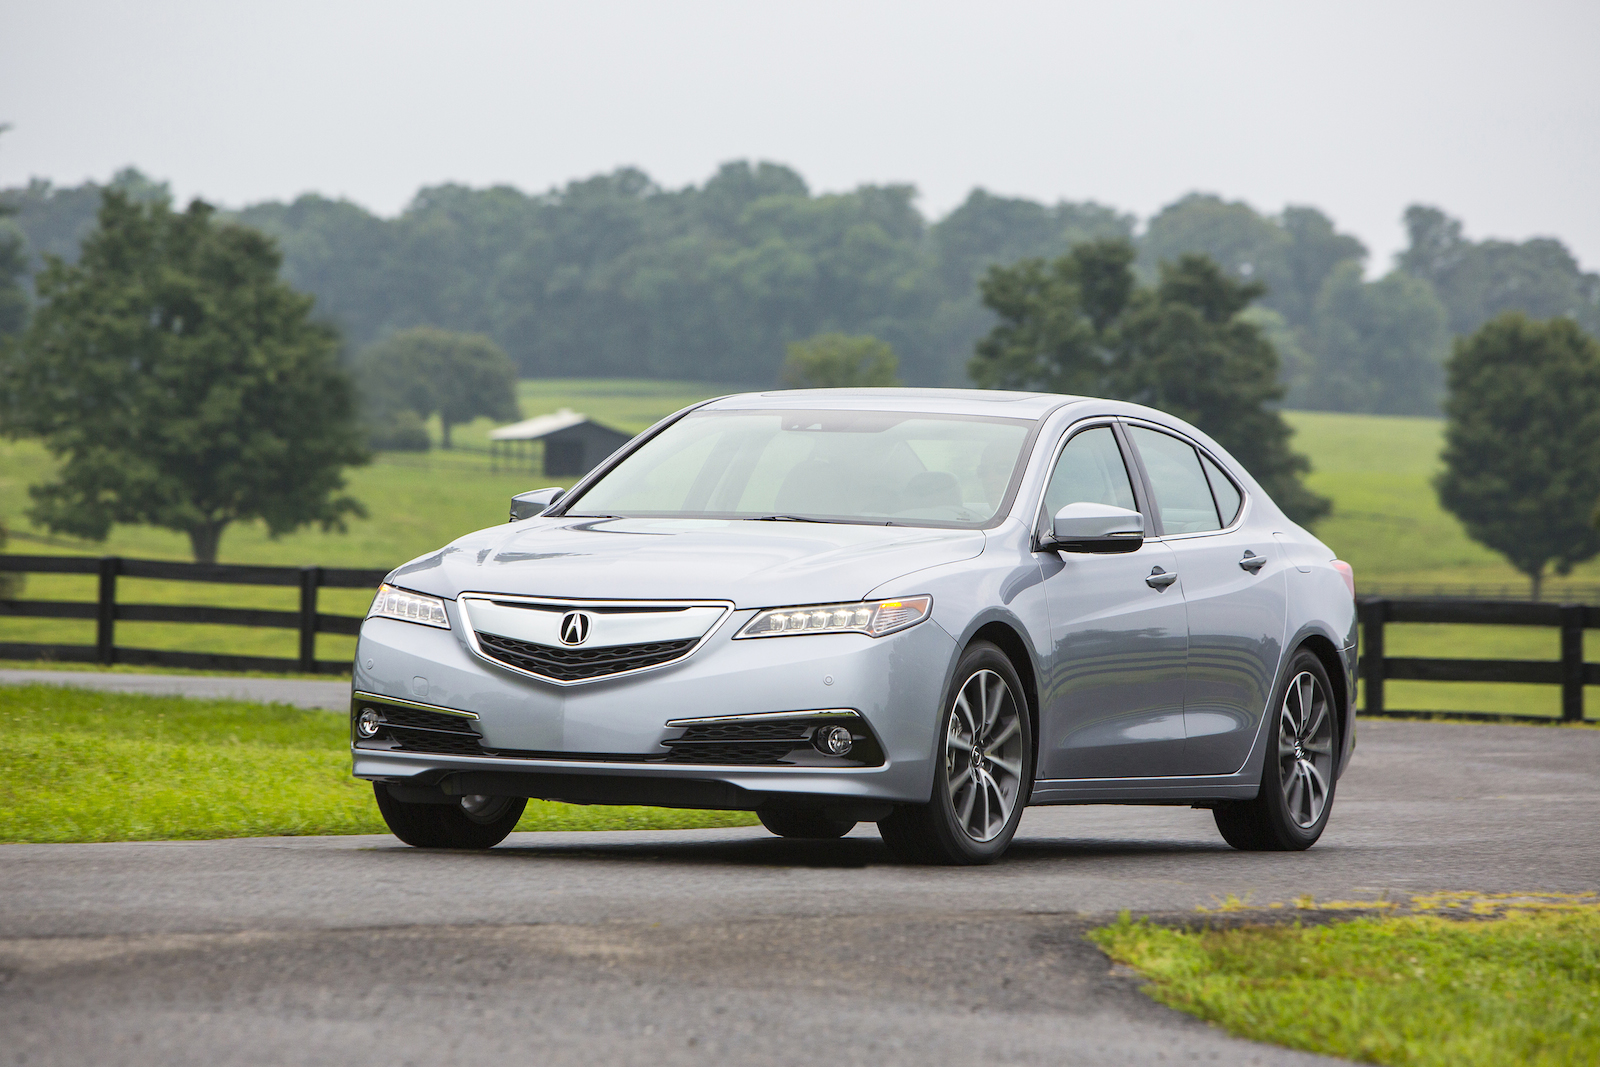 2015 Acura Tlx Review Ratings Specs Prices And Photos - The Car Connection